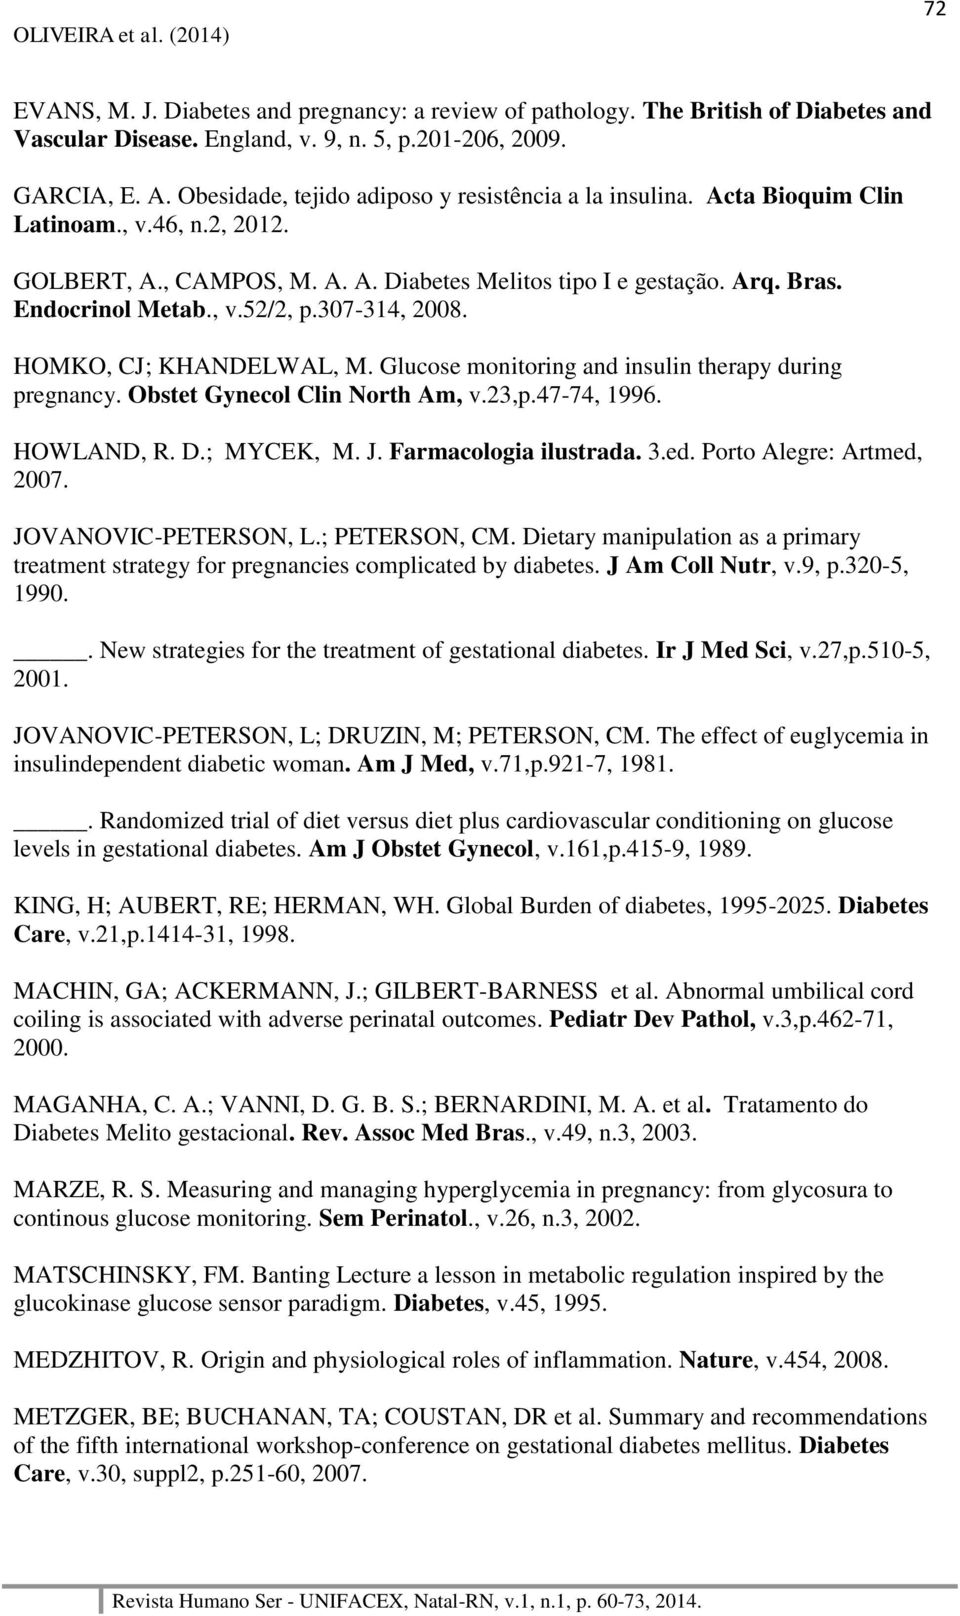 307-314, 2008. HOMKO, CJ; KHANDELWAL, M. Glucose monitoring and insulin therapy during pregnancy. Obstet Gynecol Clin North Am, v.23,p.47-74, 1996. HOWLAND, R. D.; MYCEK, M. J. Farmacologia ilustrada.